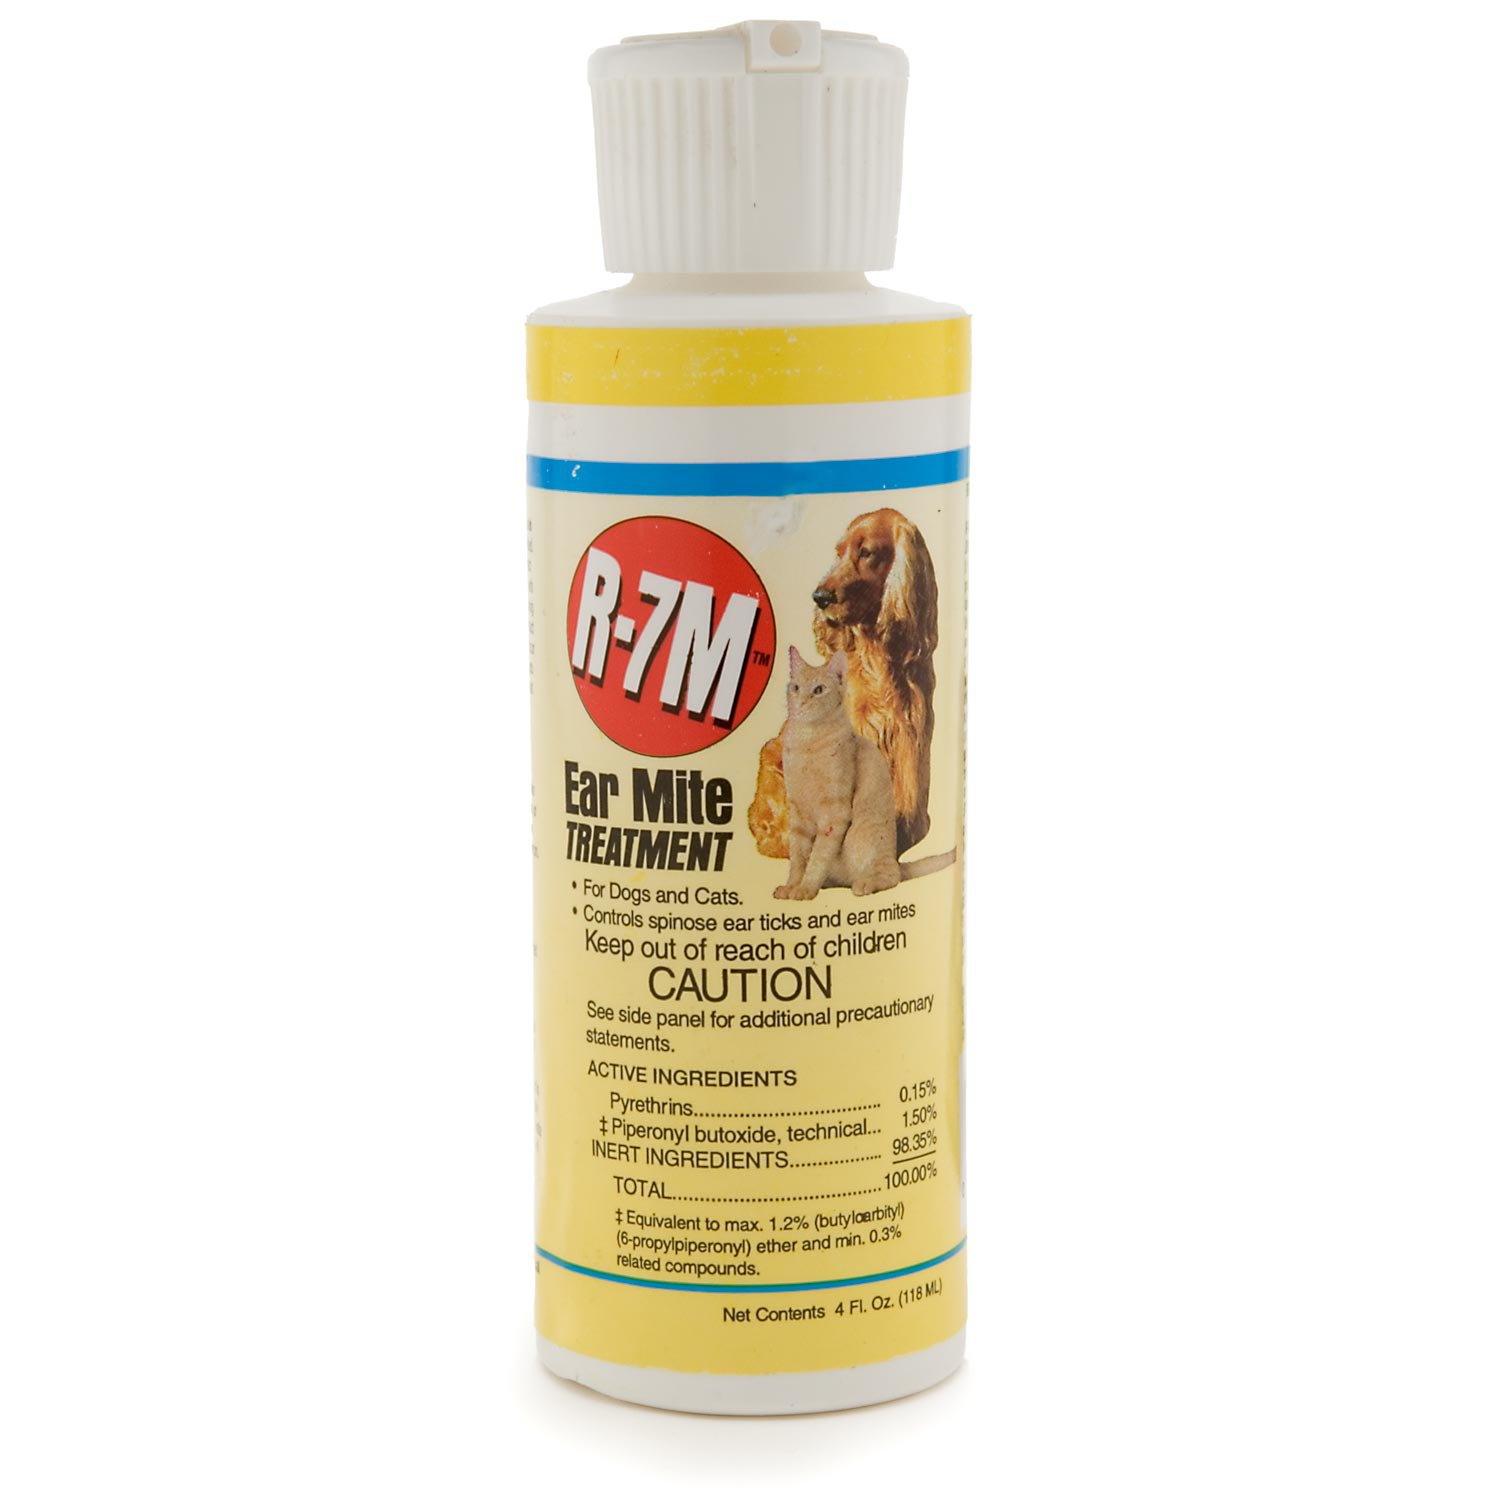 R-7M Ear Mite Treatment for Dogs & Cats | Petco